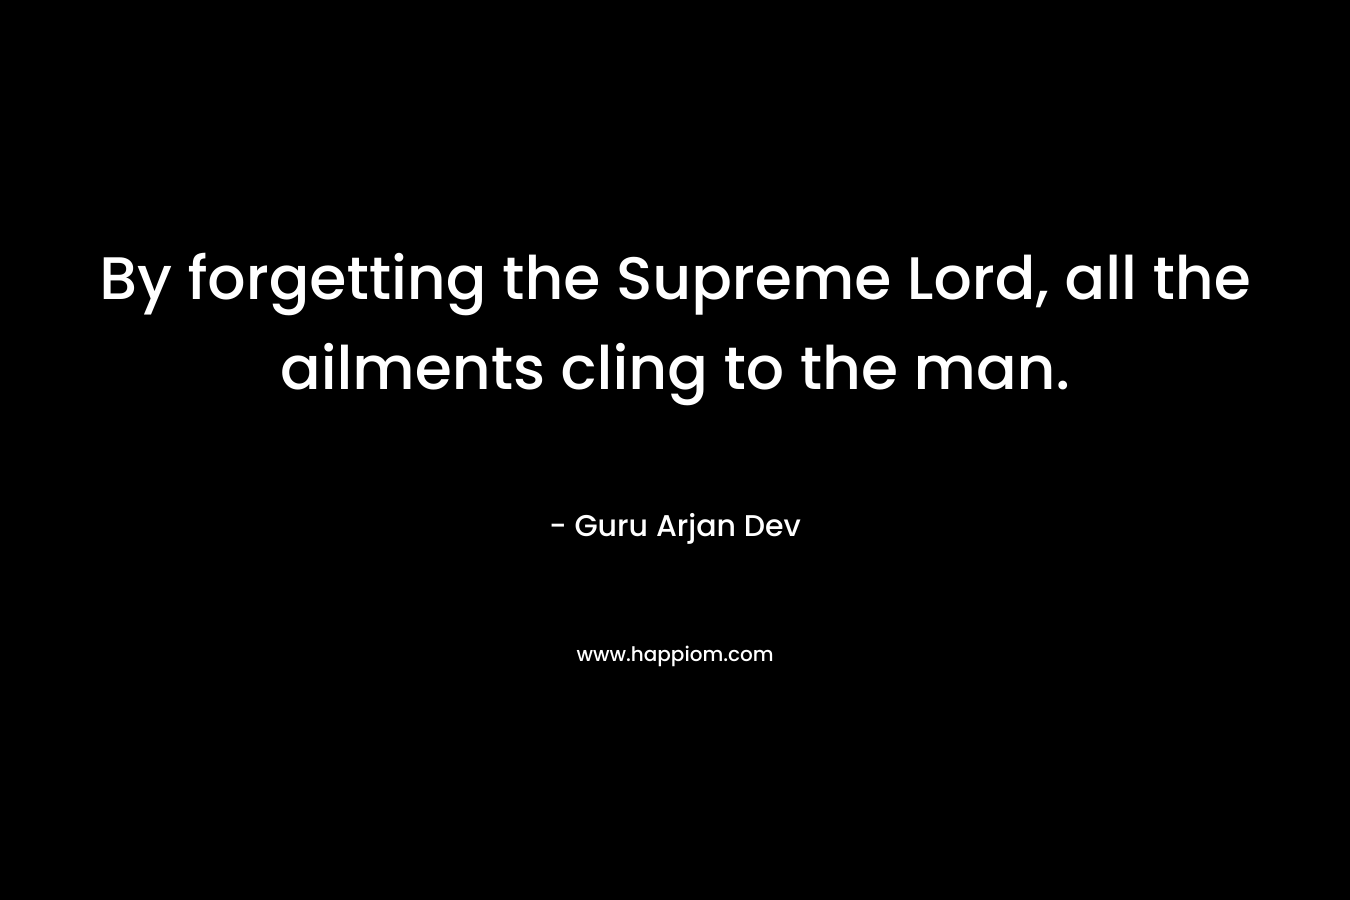 By forgetting the Supreme Lord, all the ailments cling to the man.